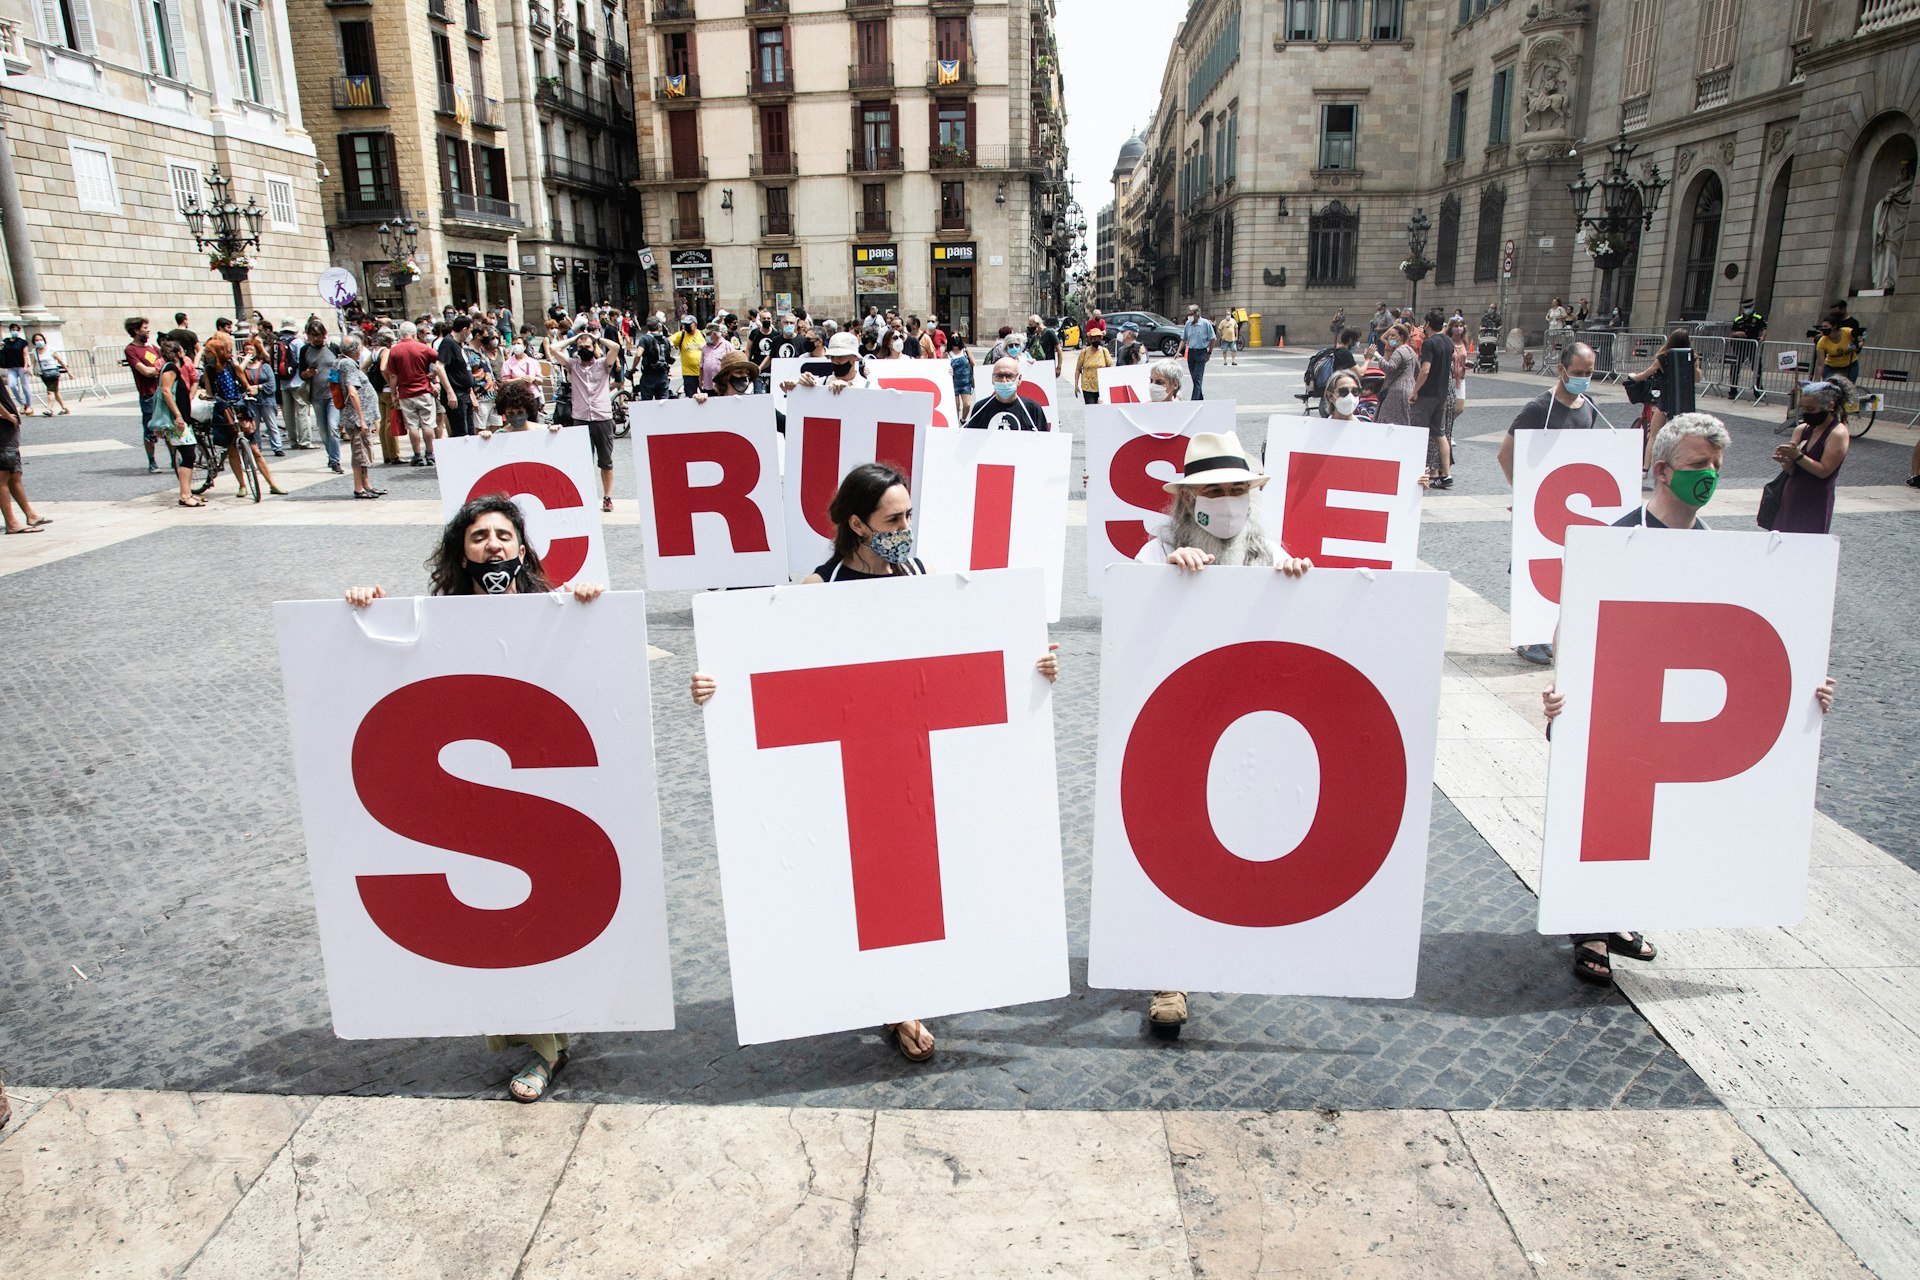 Protesters with STOP CRUISES BCN placards in Barcelona, Catalonia, Spain